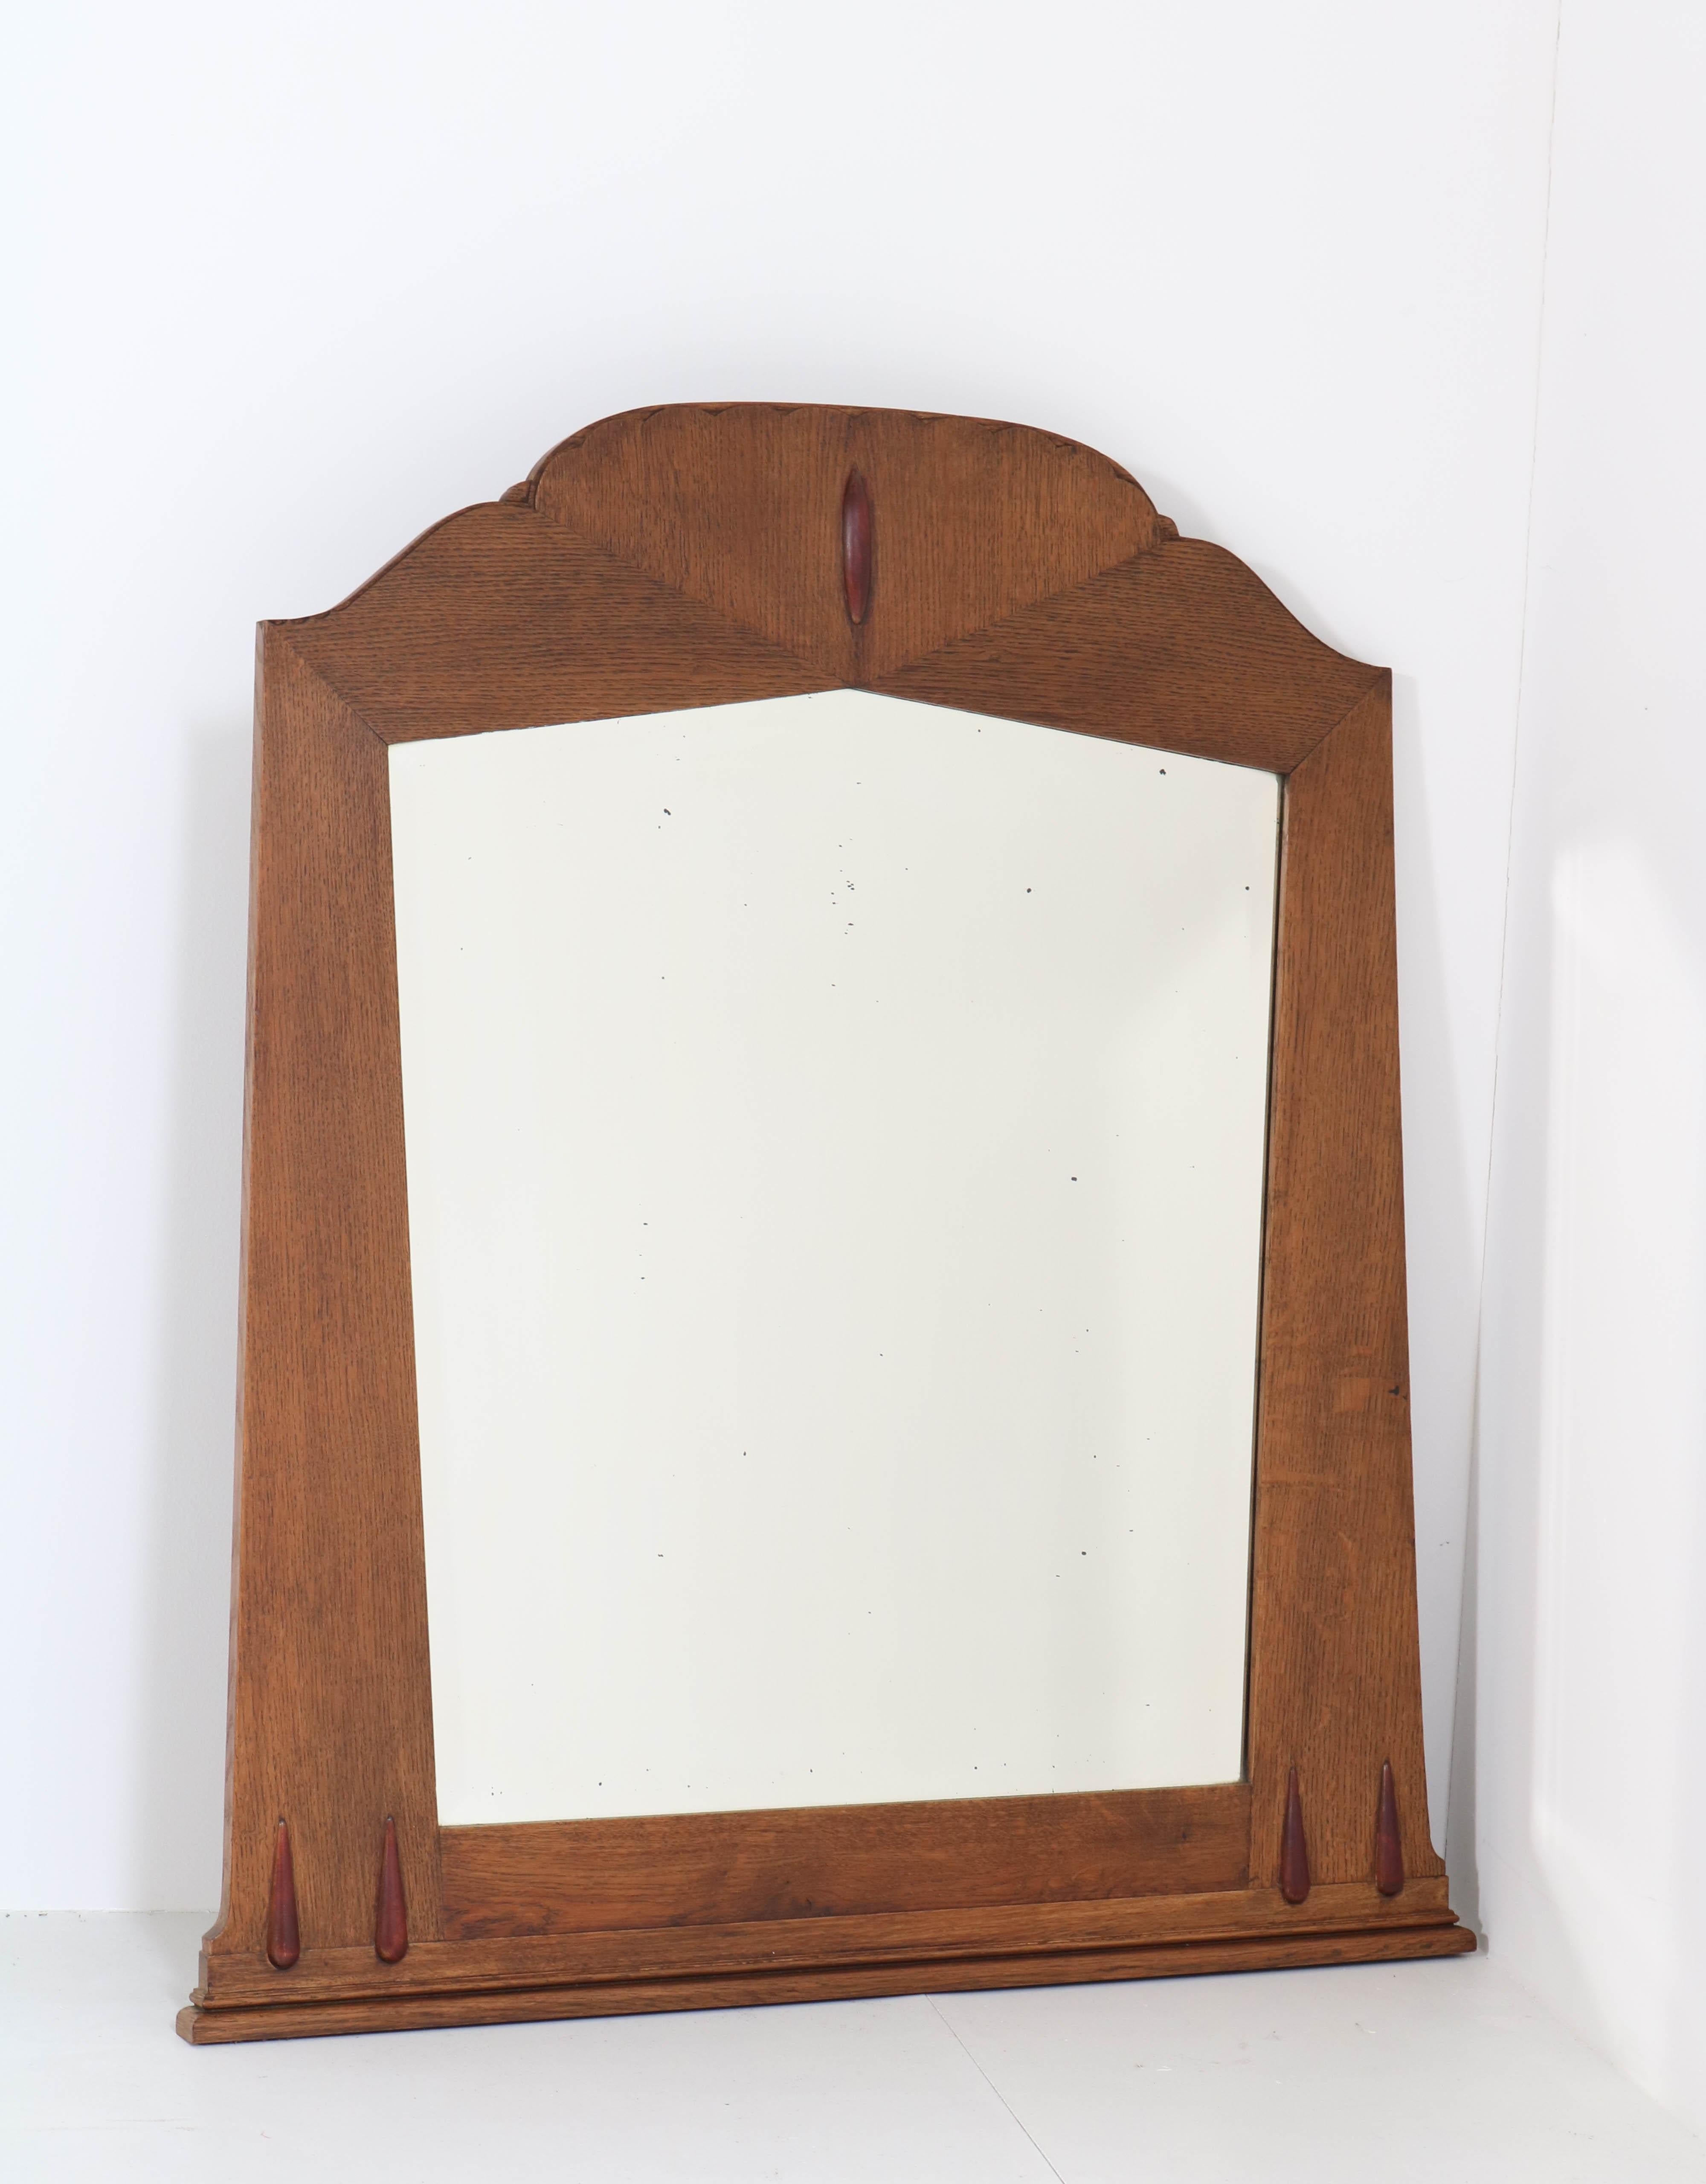 Stunning and rare Art Deco Amsterdam School wall mirror.
Design by Fa. S. Speelman Rotterdam.
Striking Dutch design from the twenties.
Solid oak frame with original beveled mirrored glass.
In very good original condition with minor wear (the